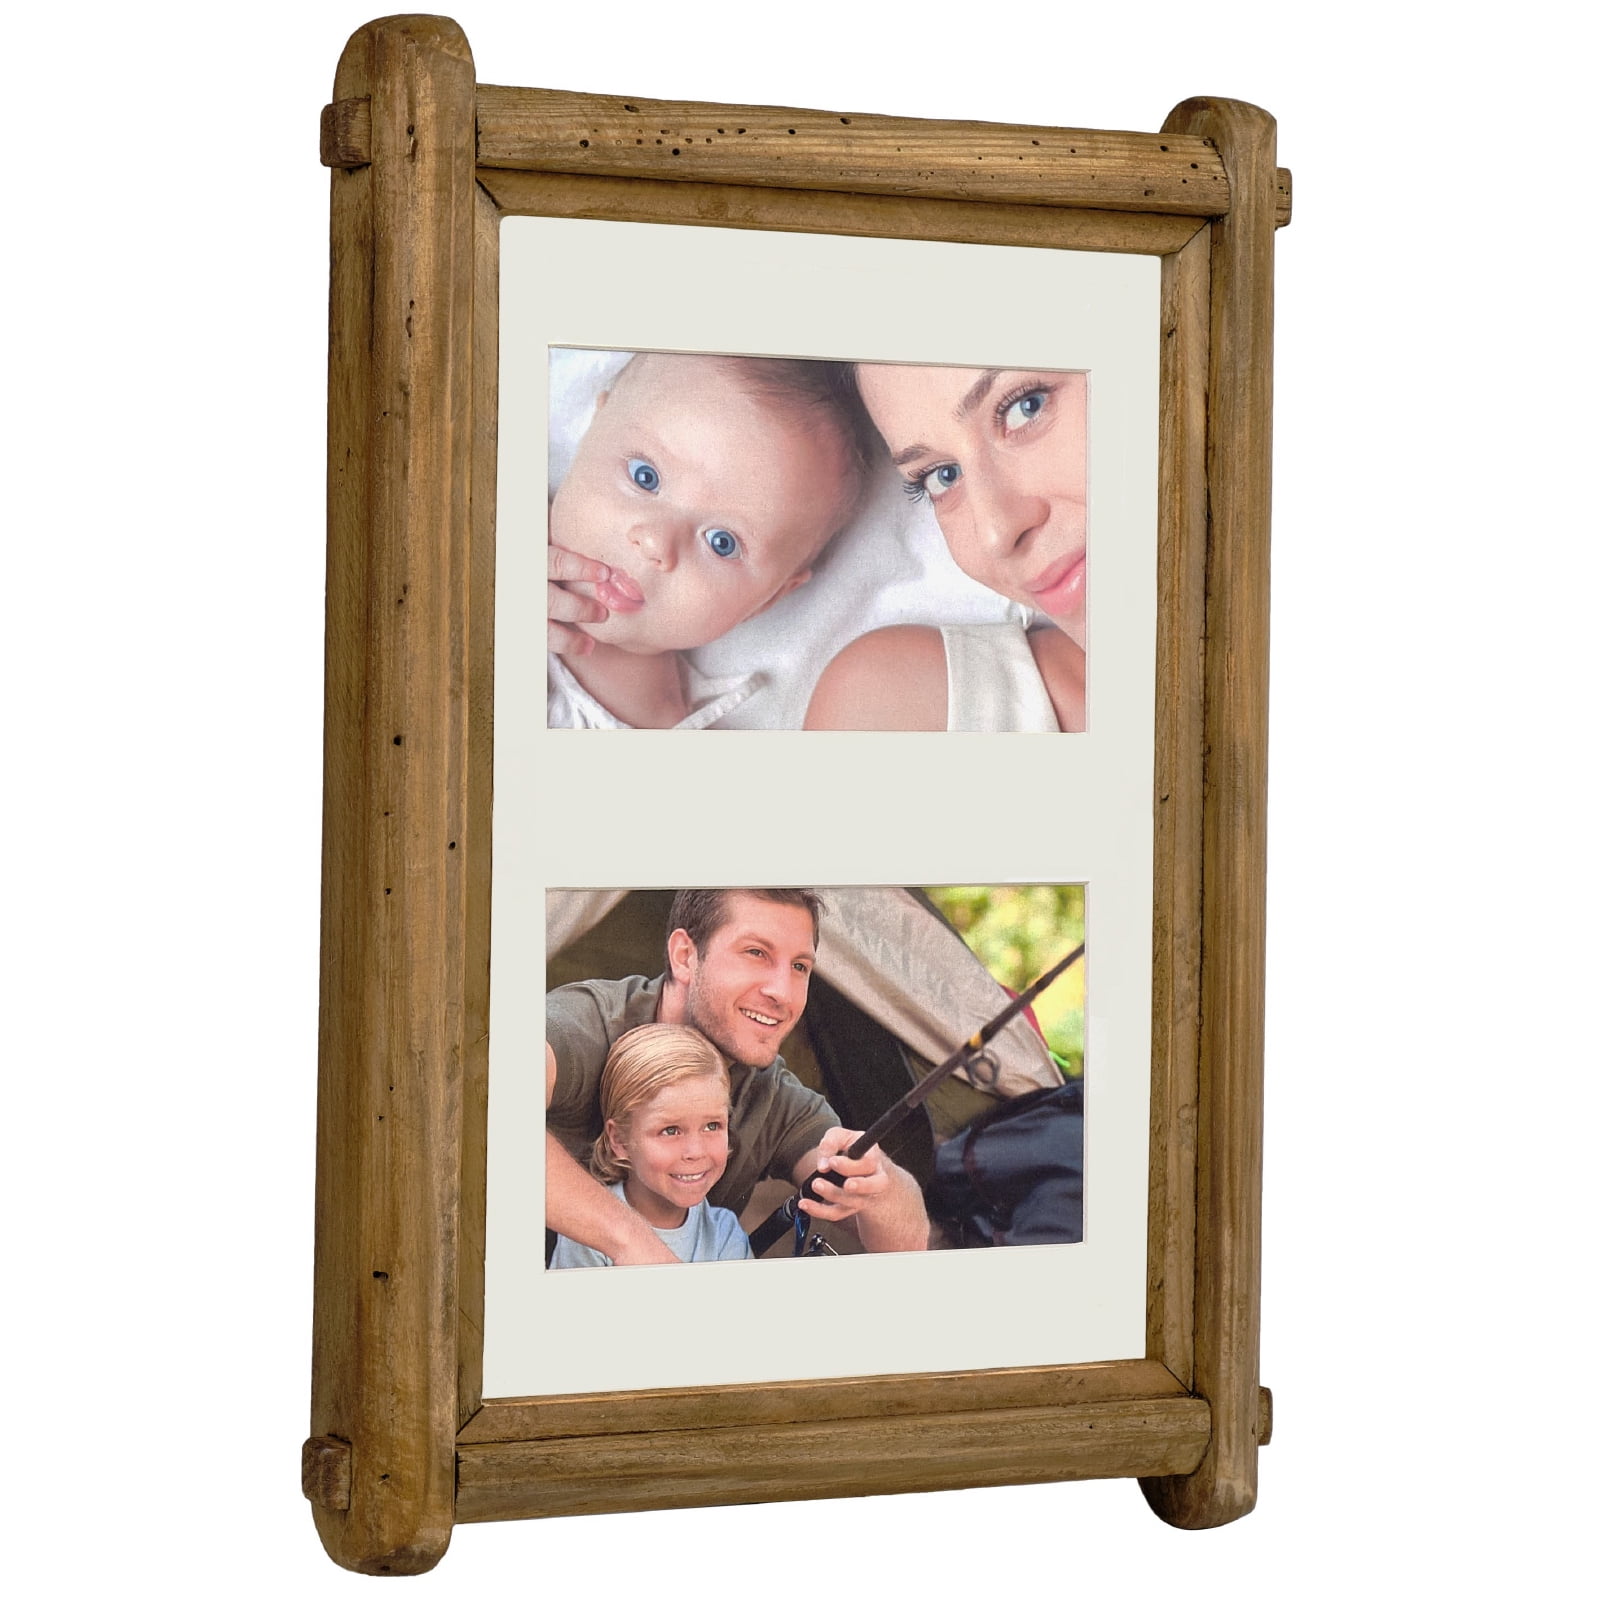 4 x 6 Rustic Wall Christmas Picture Frames Natural Wood Antique Red Photo Frame Distressed Farmhouse Handmade Frame with Glass for Bedroom Living Room Halloween Christmas 